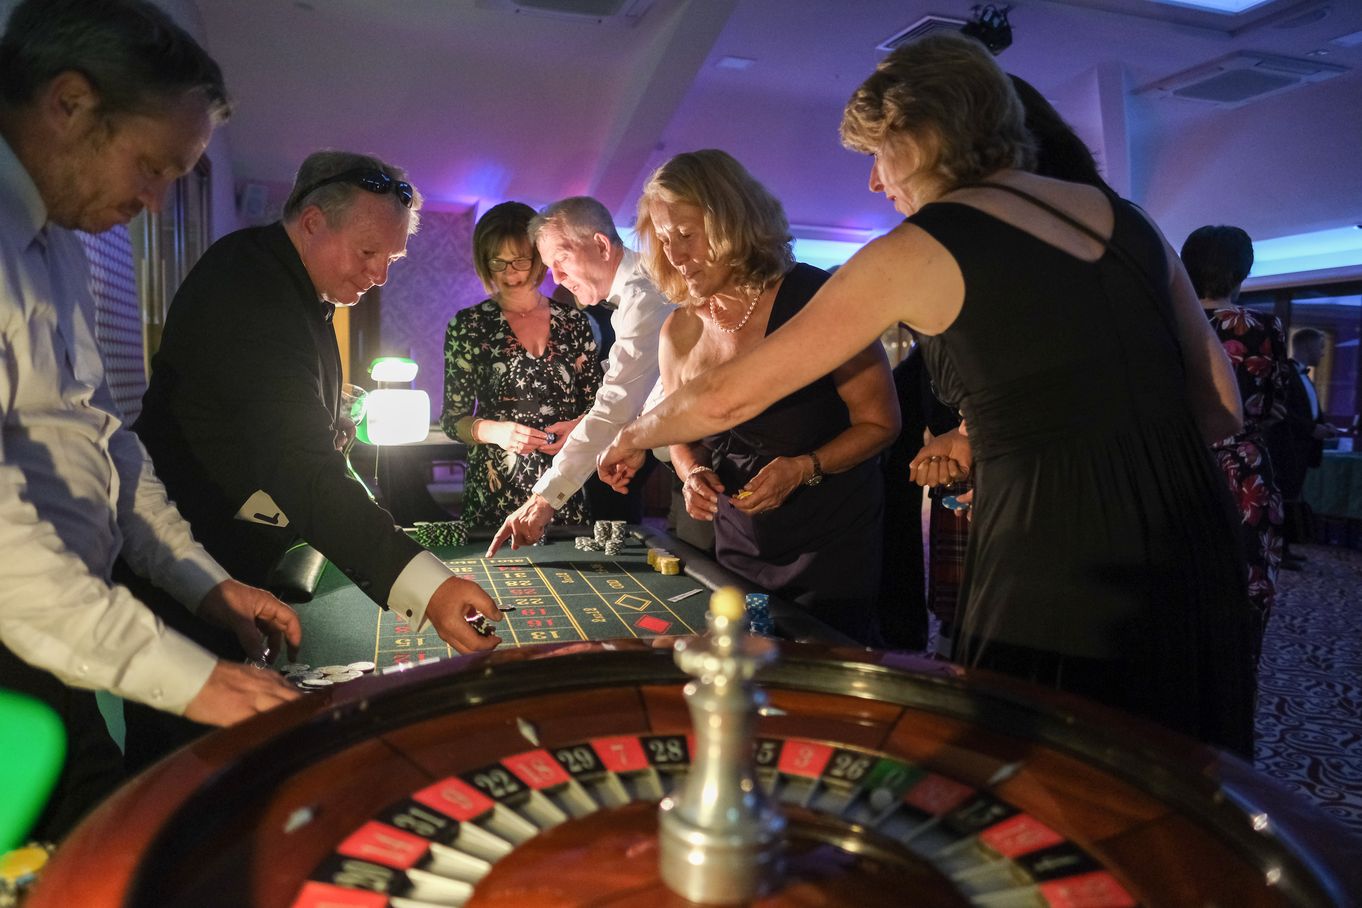 People playing at the roulette table of the Calvert Summer Ball Casino